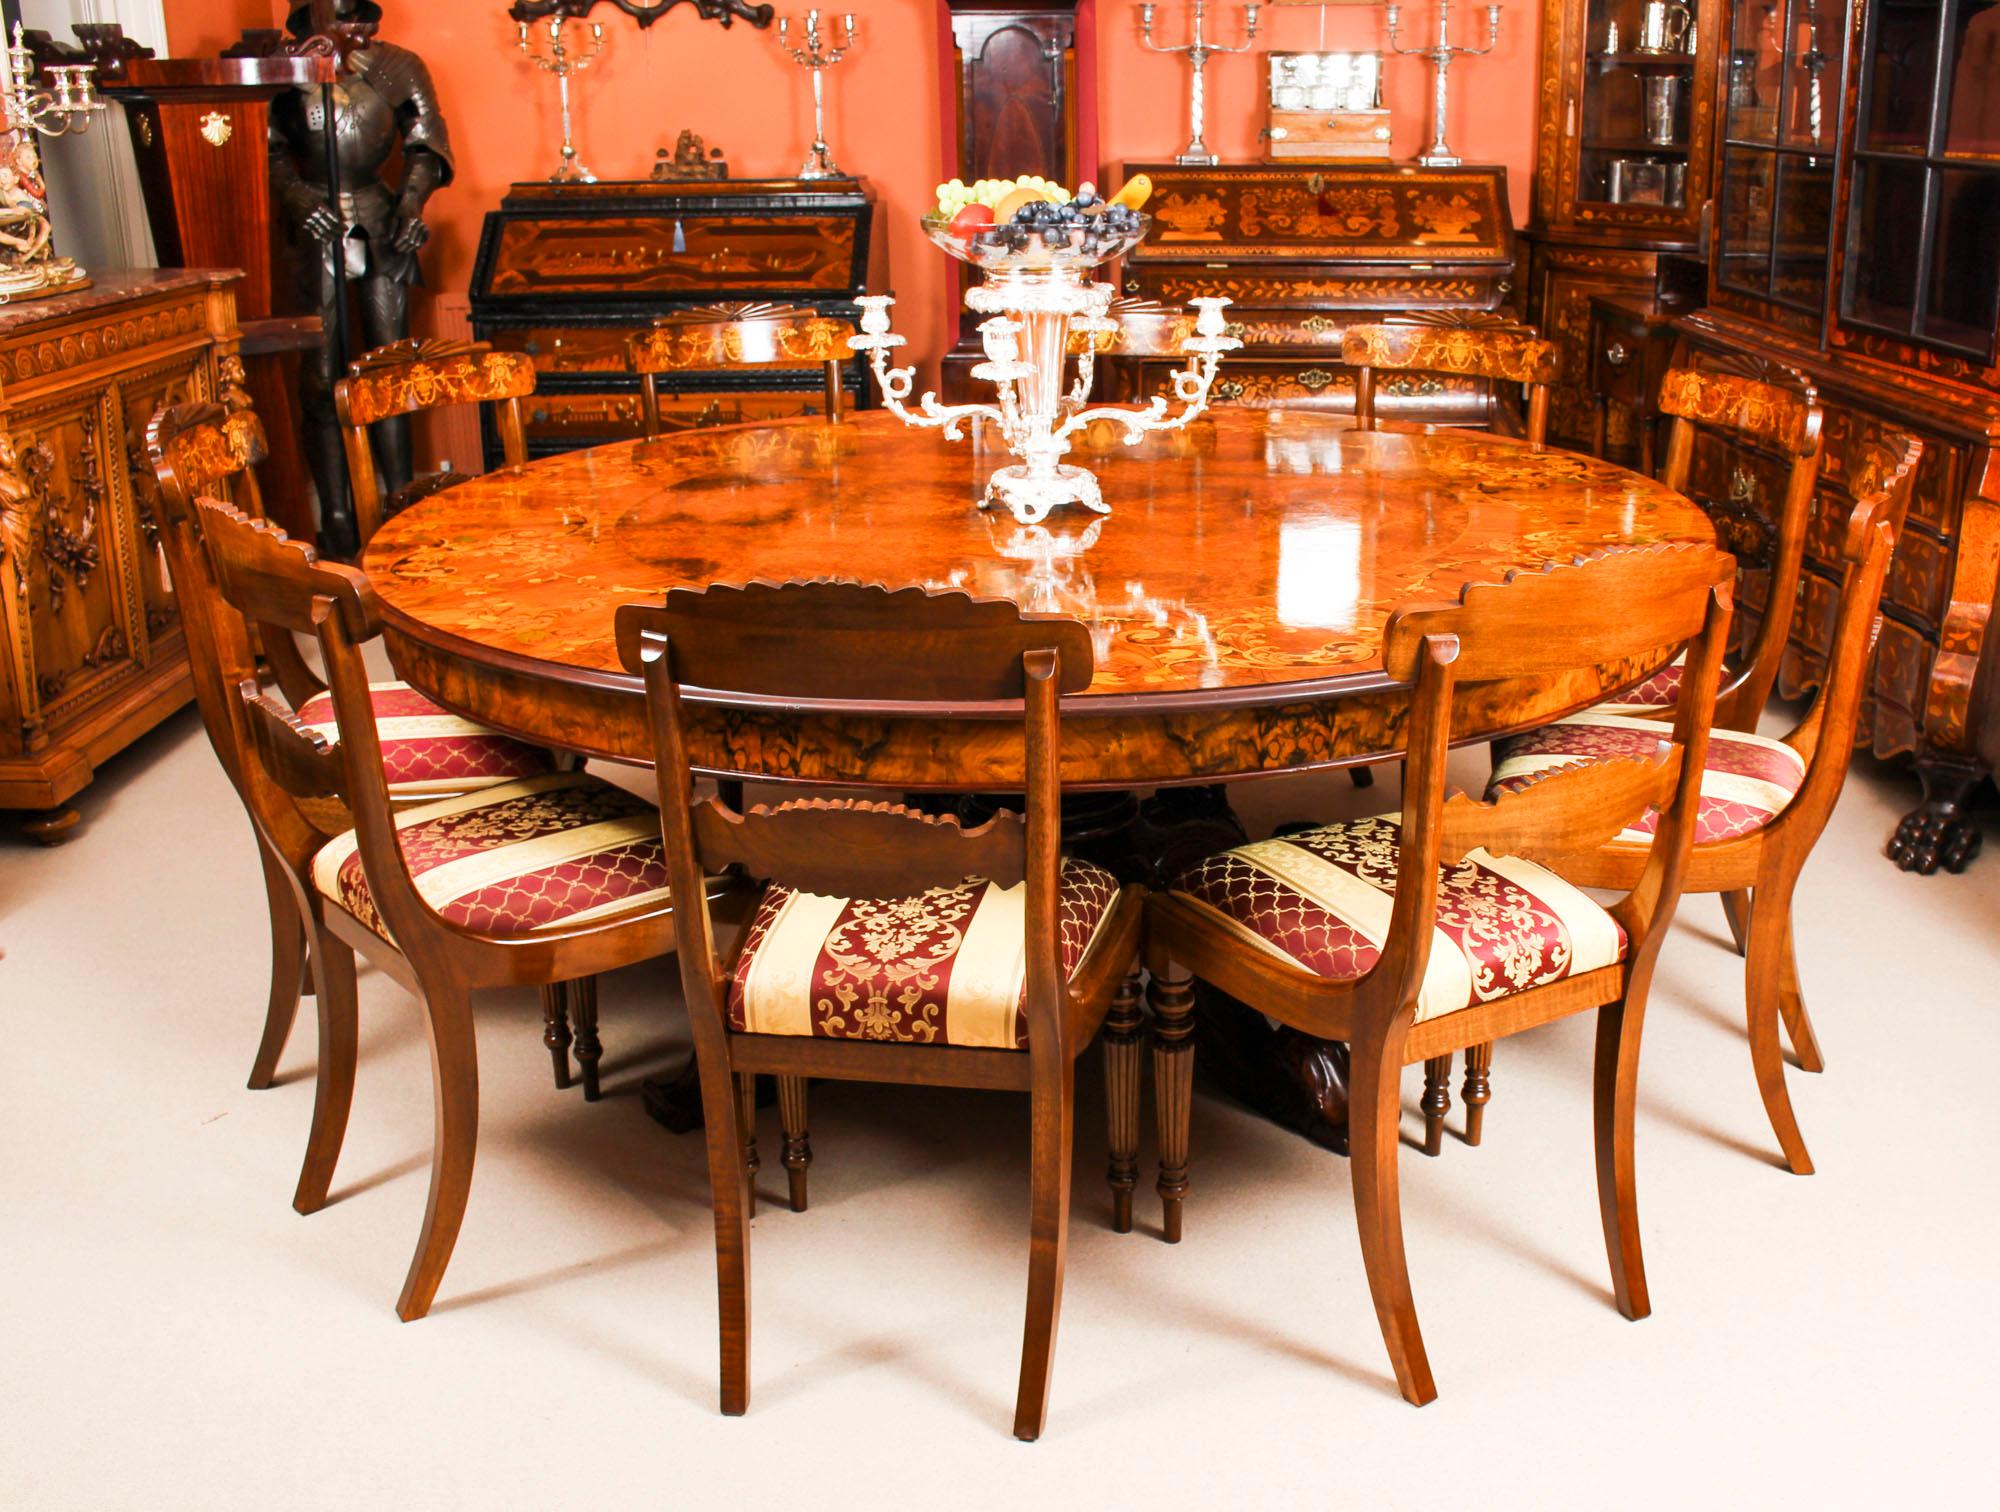 A beautiful large 200 cm diameter dining set comprising a superb vintage table that can seat ten in comfort and ten chairs, dating from the mid-20th century.

The table is of fabulous quality and in excellent condition. It is highly desirable to